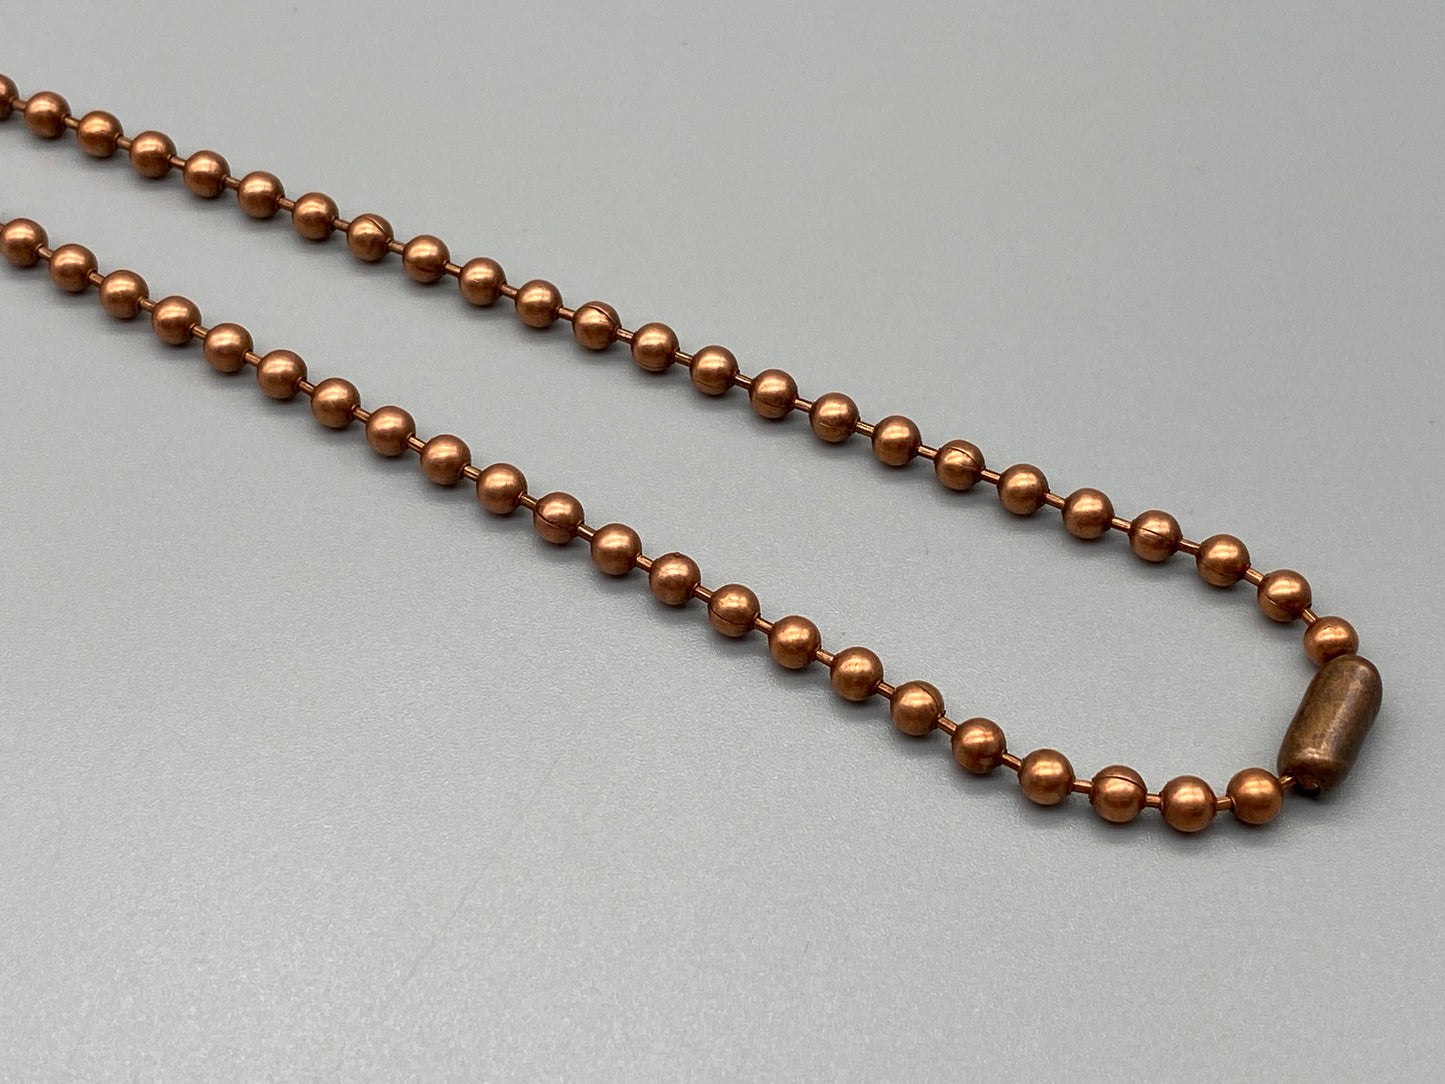 Antique Copper Metal Chain - No.10 Bead Size: 4.5mm + Free Connector